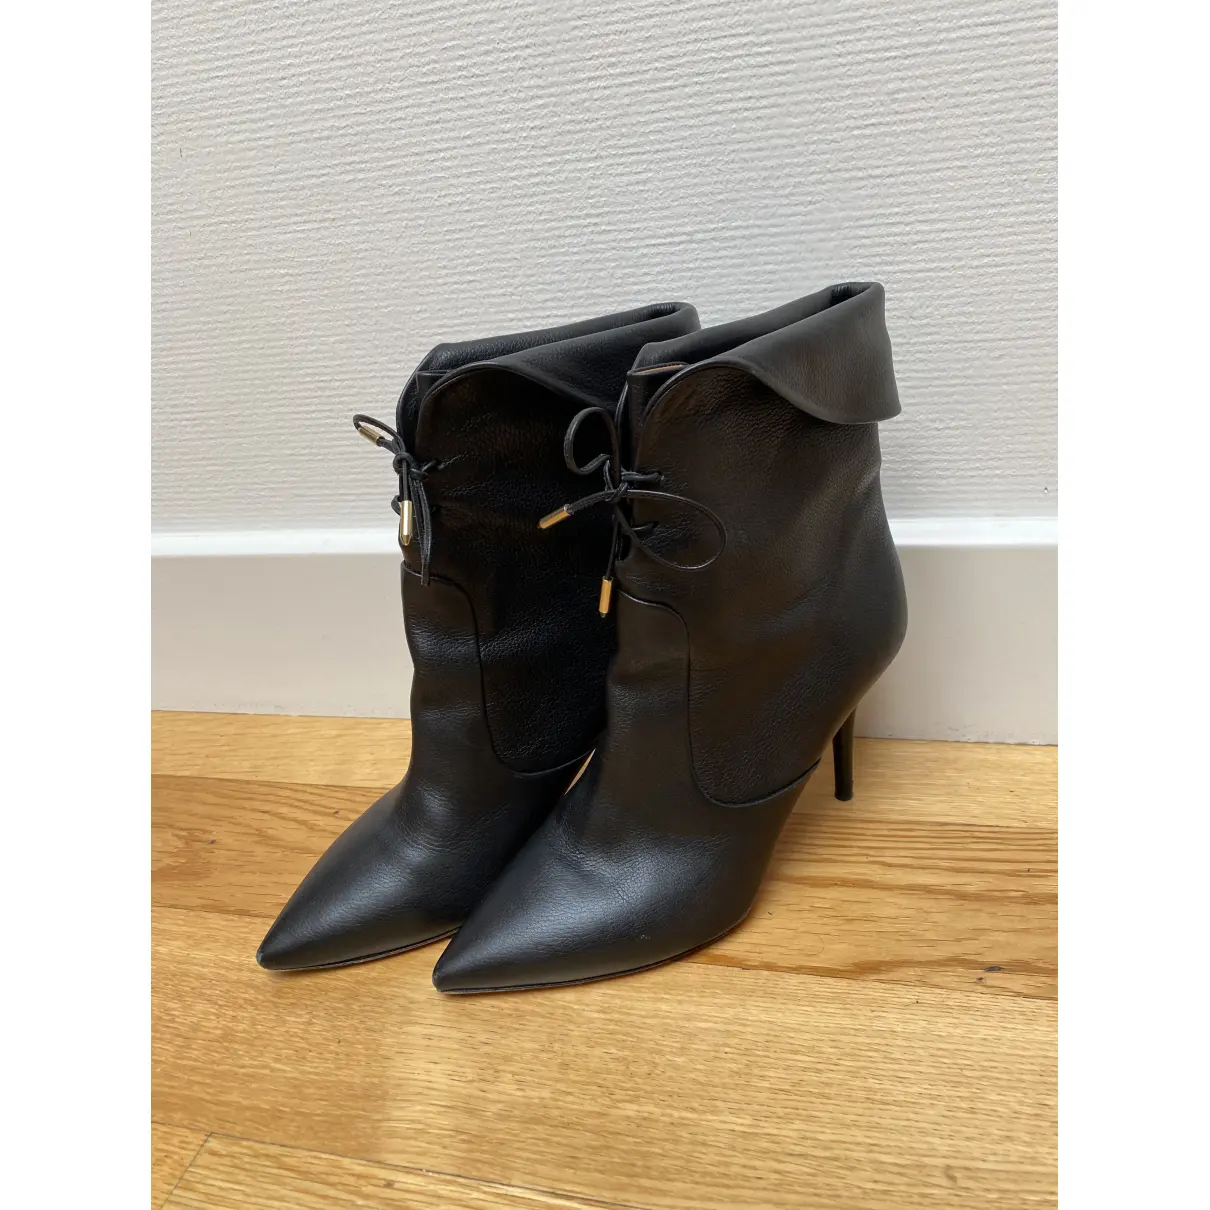 Buy Aquazzura Leather ankle boots online